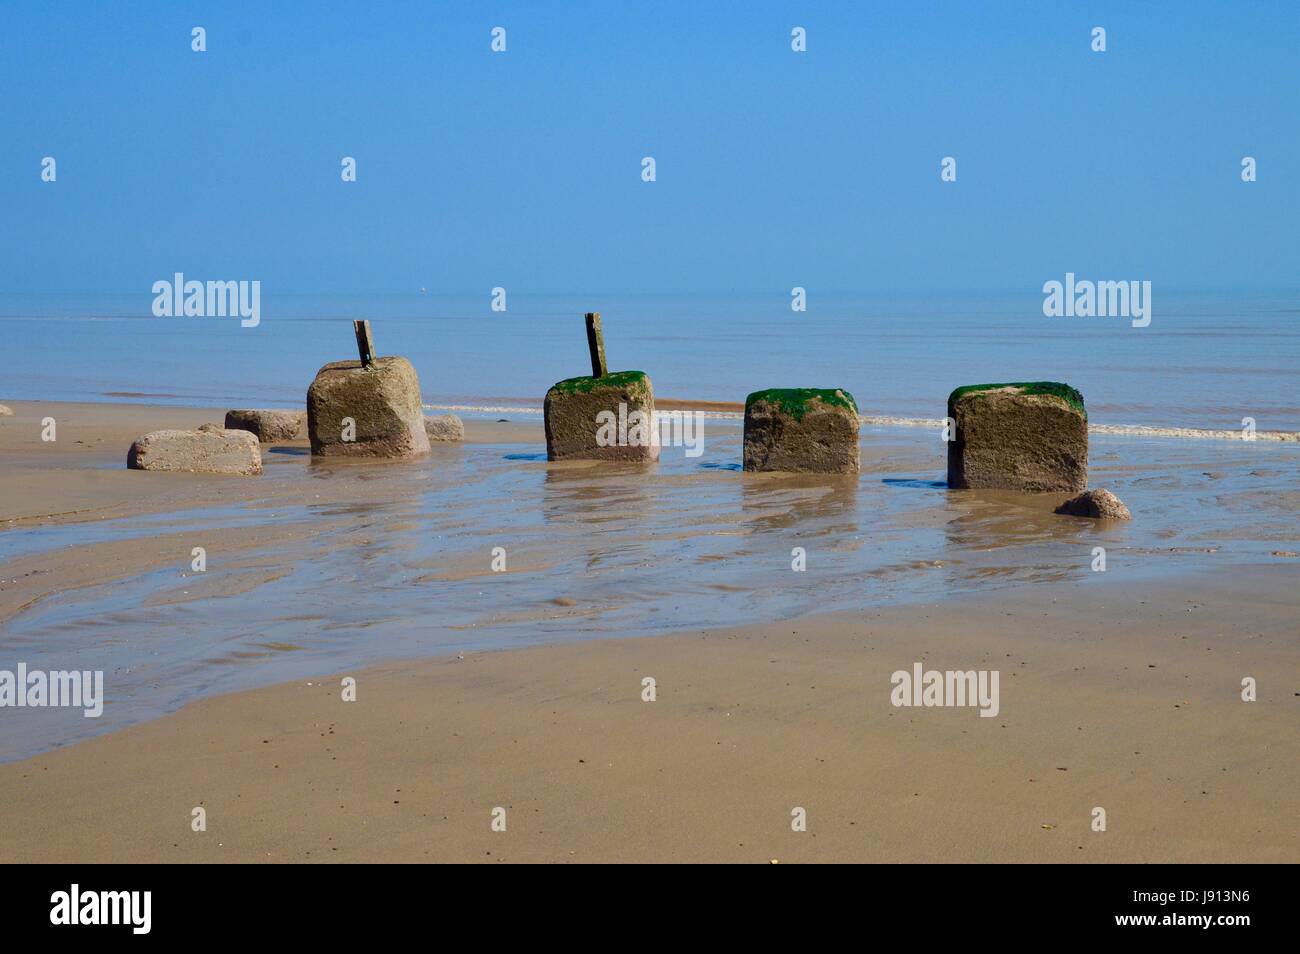 Old Sea Defences on the Beach. Stock Photo